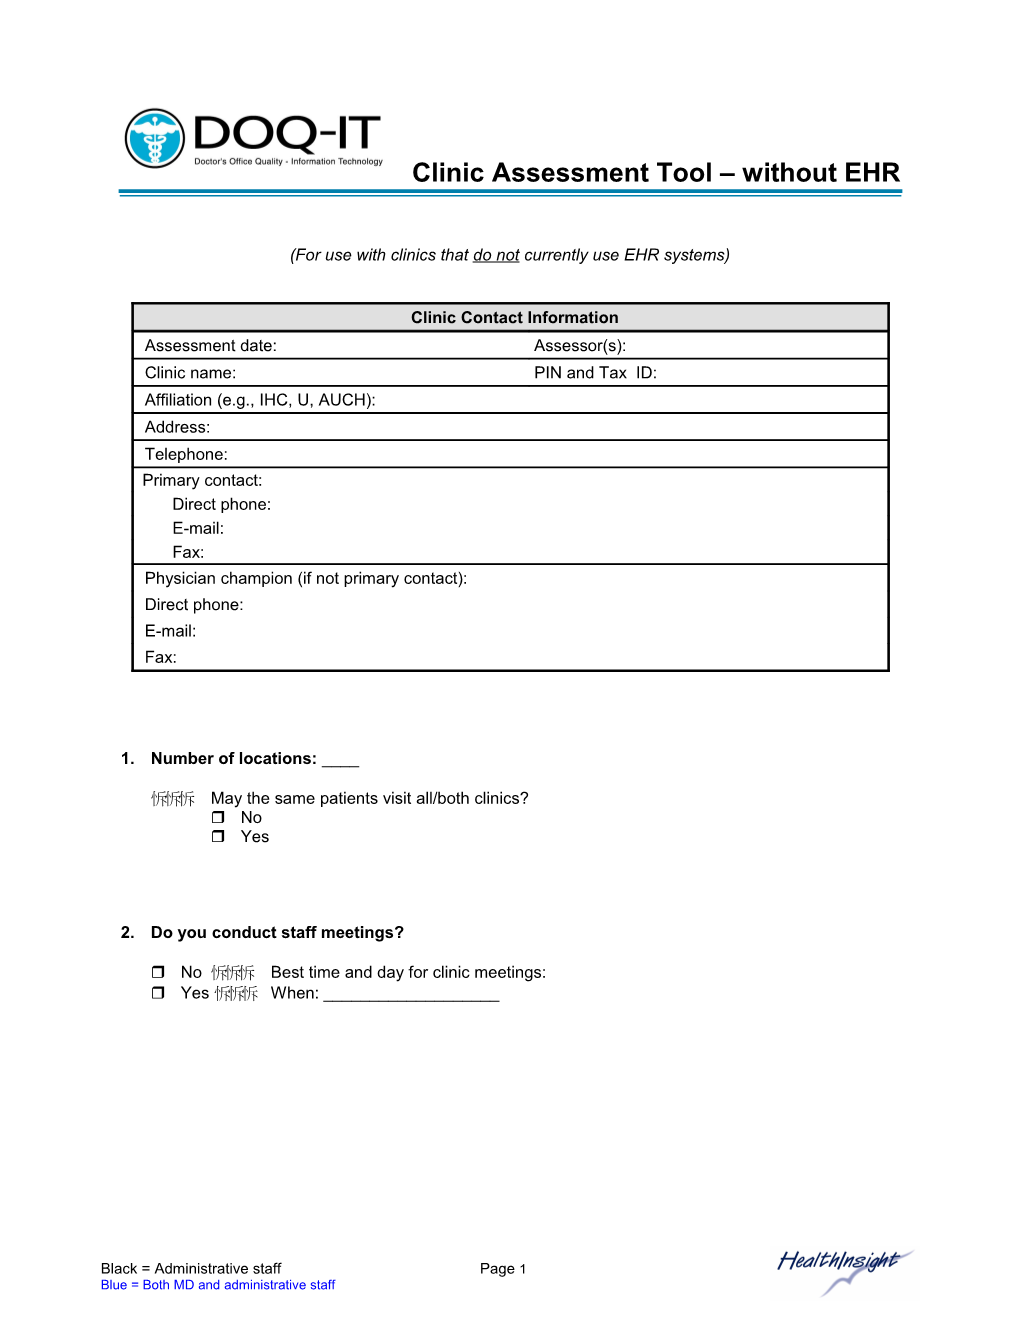 Clinic Assessment W/O EHR